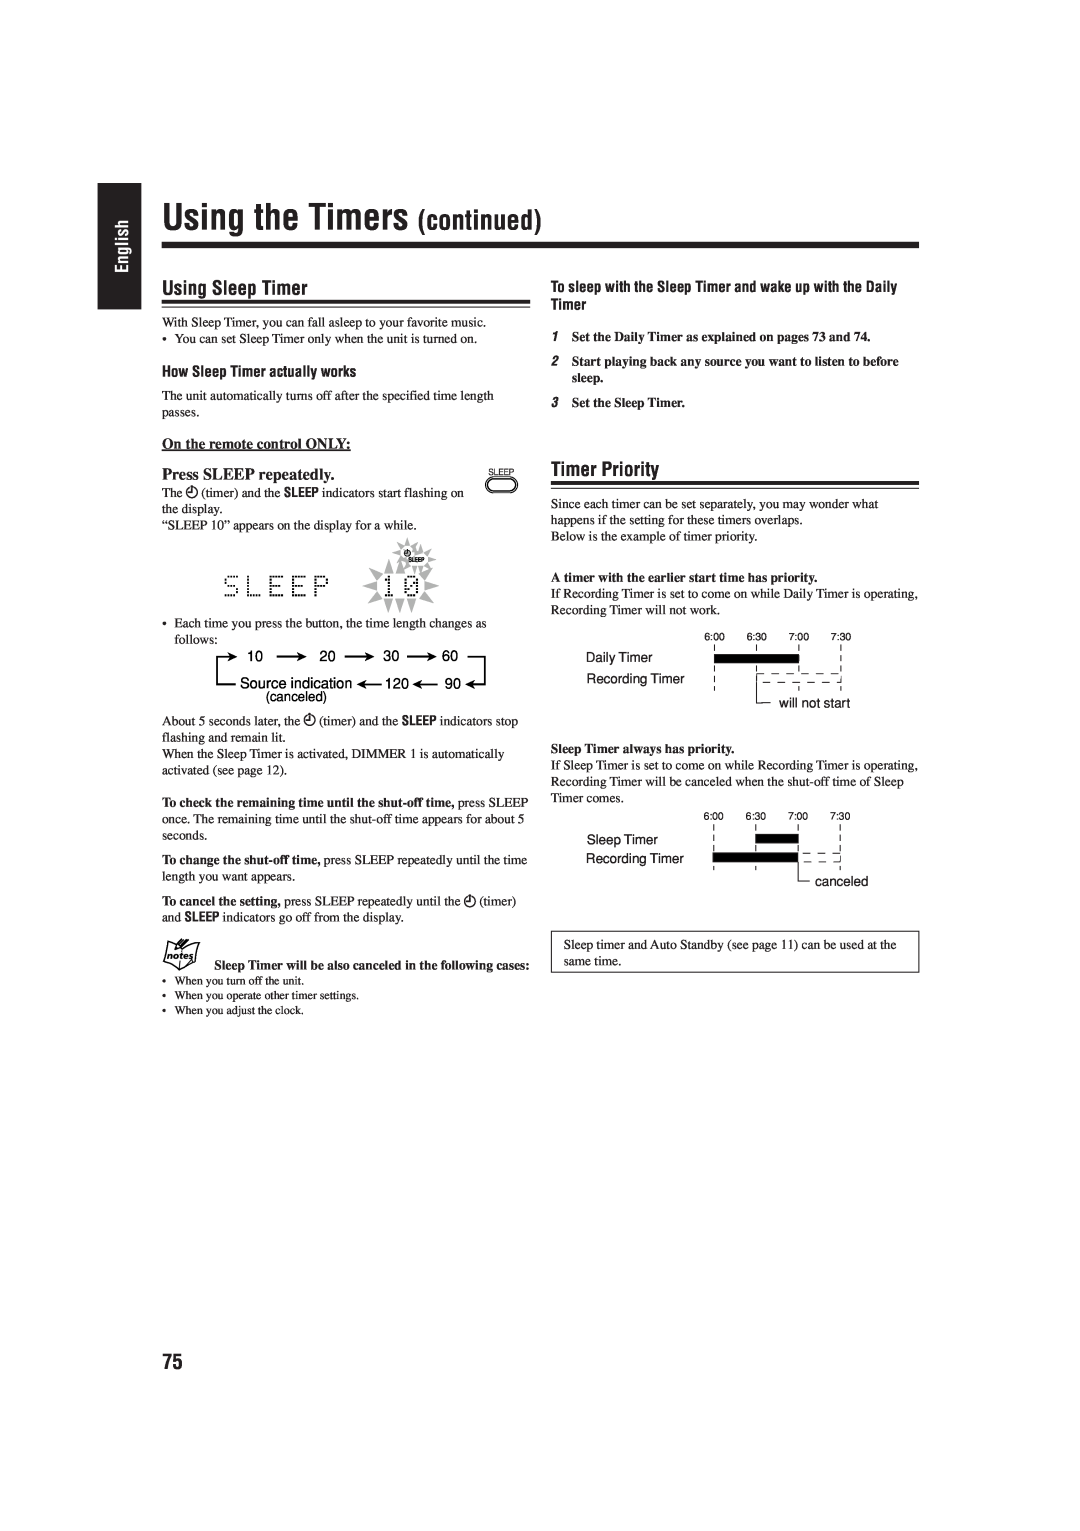 JVC UX-J99DVD manual Using Sleep Timer, Timer Priority, Press SLEEP repeatedly, Using the Timers continued, English 